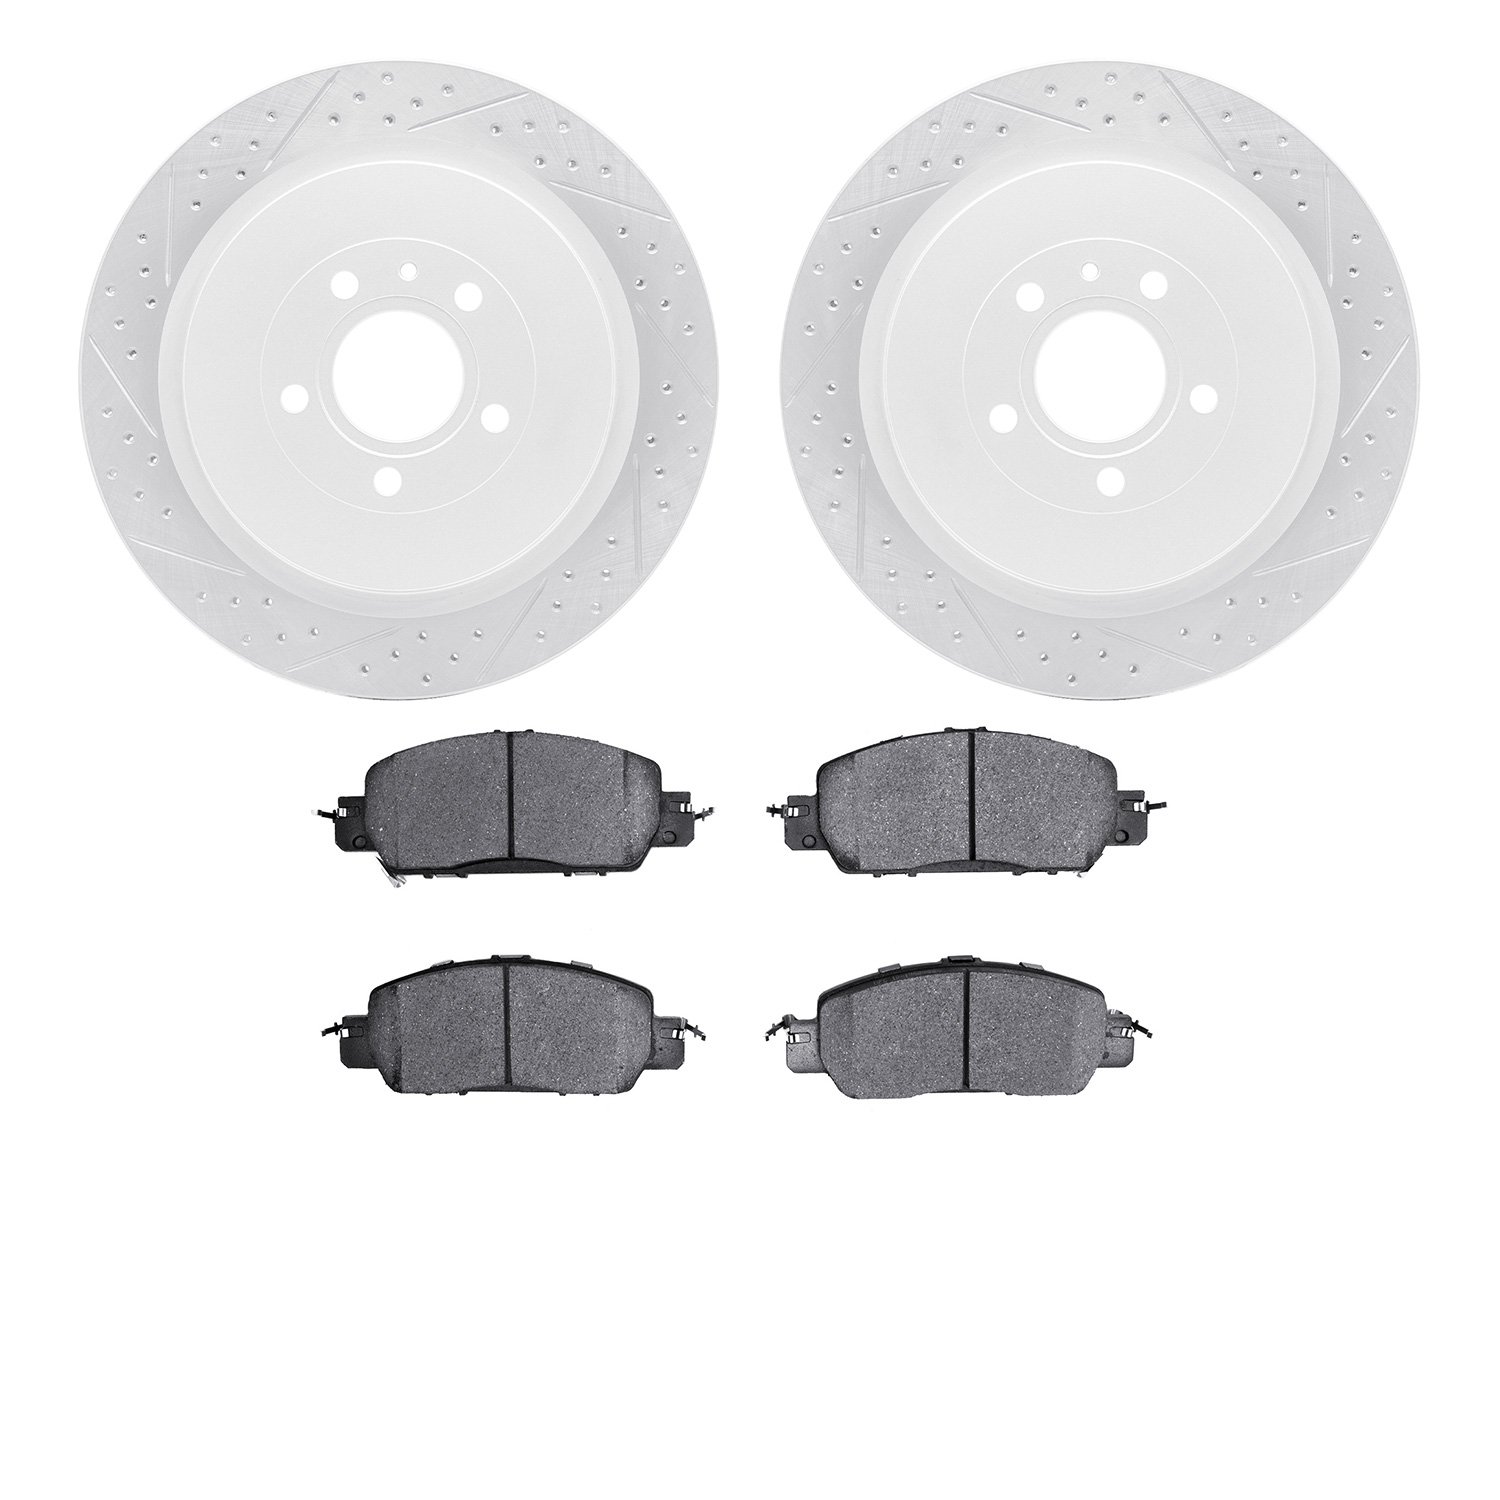 2502-54240 Geoperformance Drilled/Slotted Rotors w/5000 Advanced Brake Pads Kit, 2013-2014 Ford/Lincoln/Mercury/Mazda, Position: